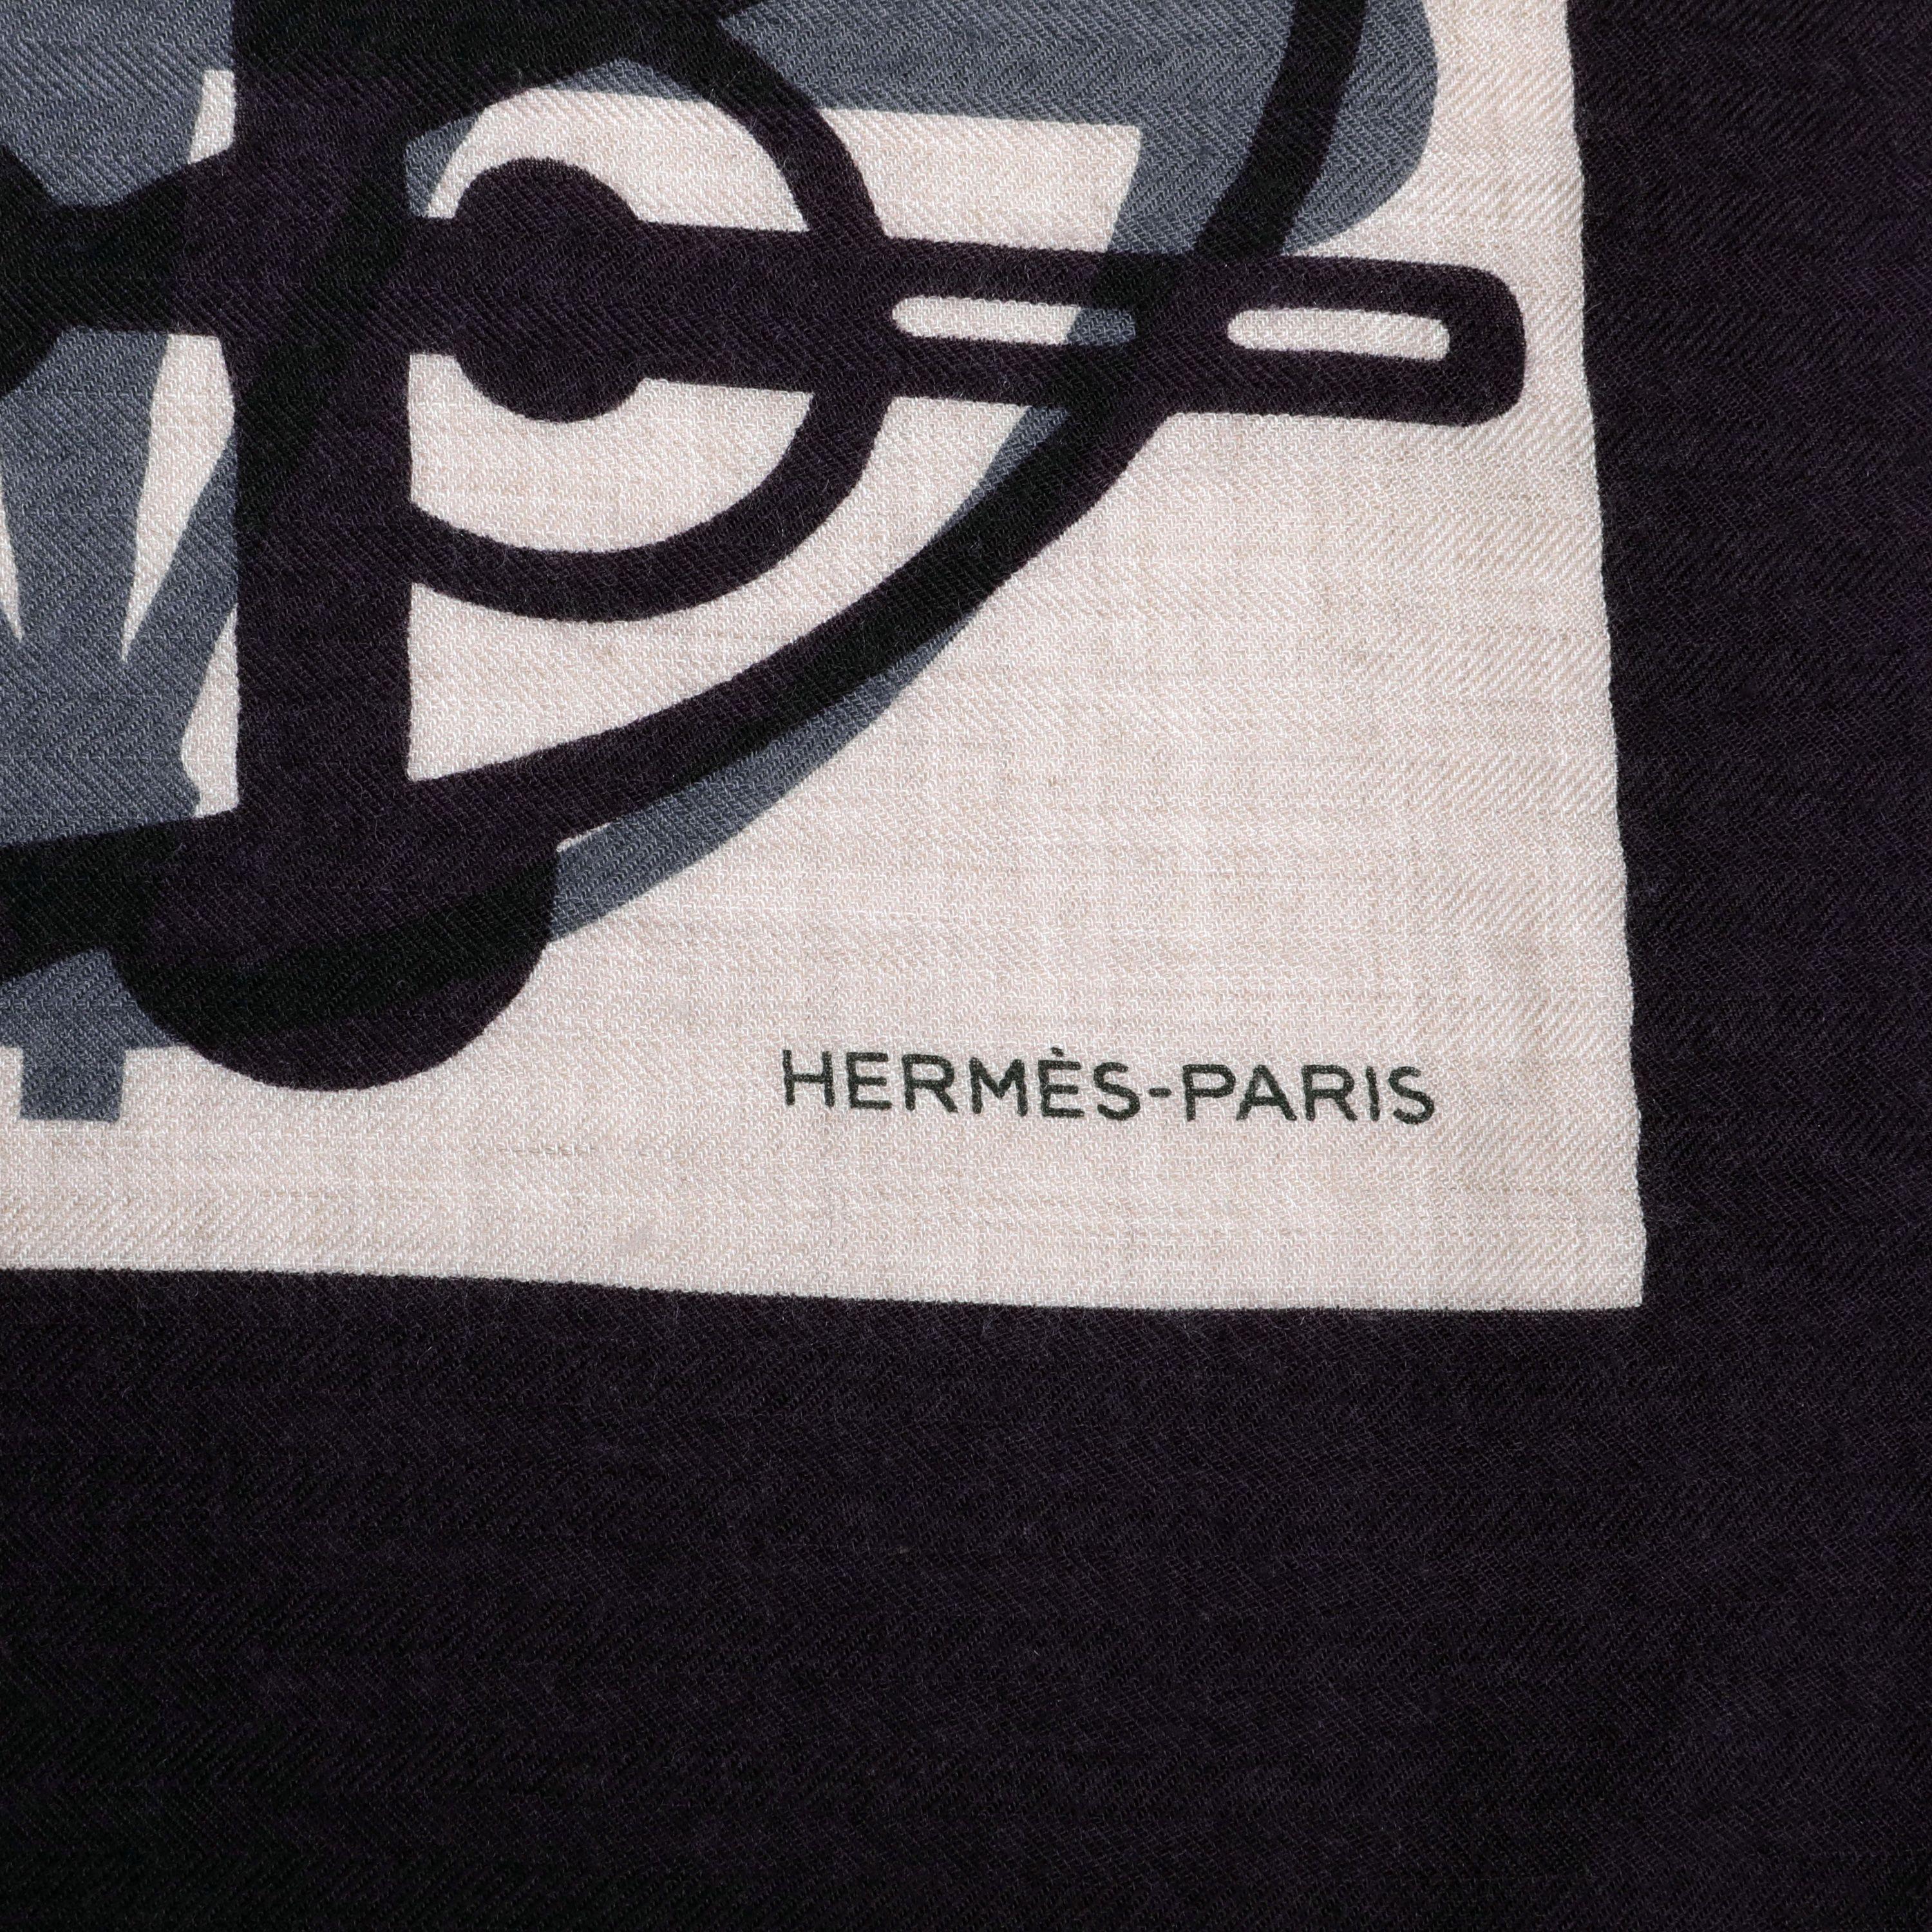 This authentic Hermès Navy Purple Grey Motif Cashmere Scarf is pristine.  Geometric print in moody shades of deep blue, purple and grey.  

PBF 13649
